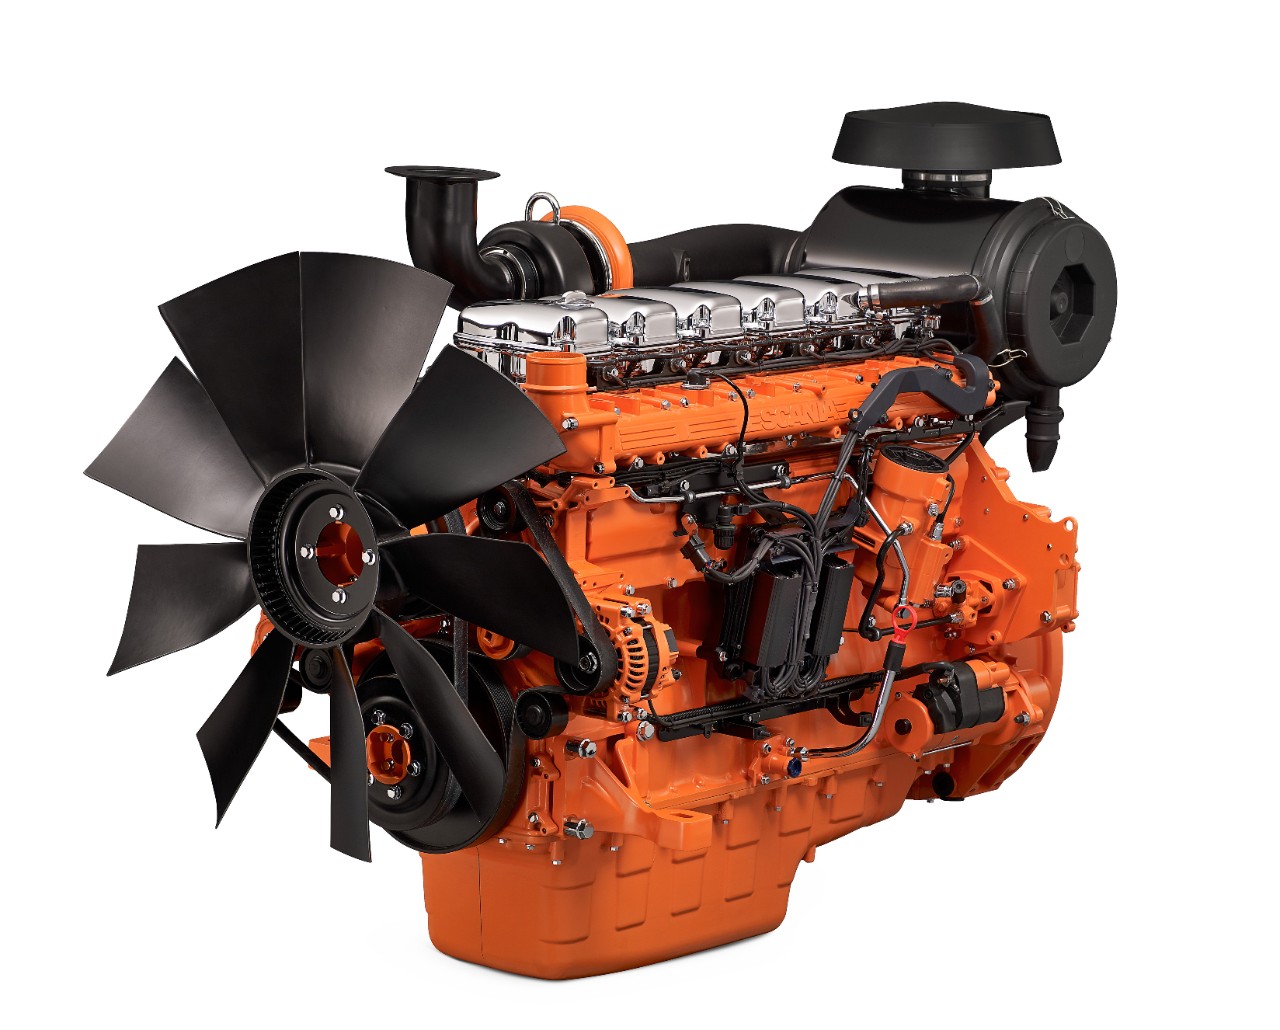 Scania 13-litre power generation engine with PDE injector.Photo: Göran Wink 2010